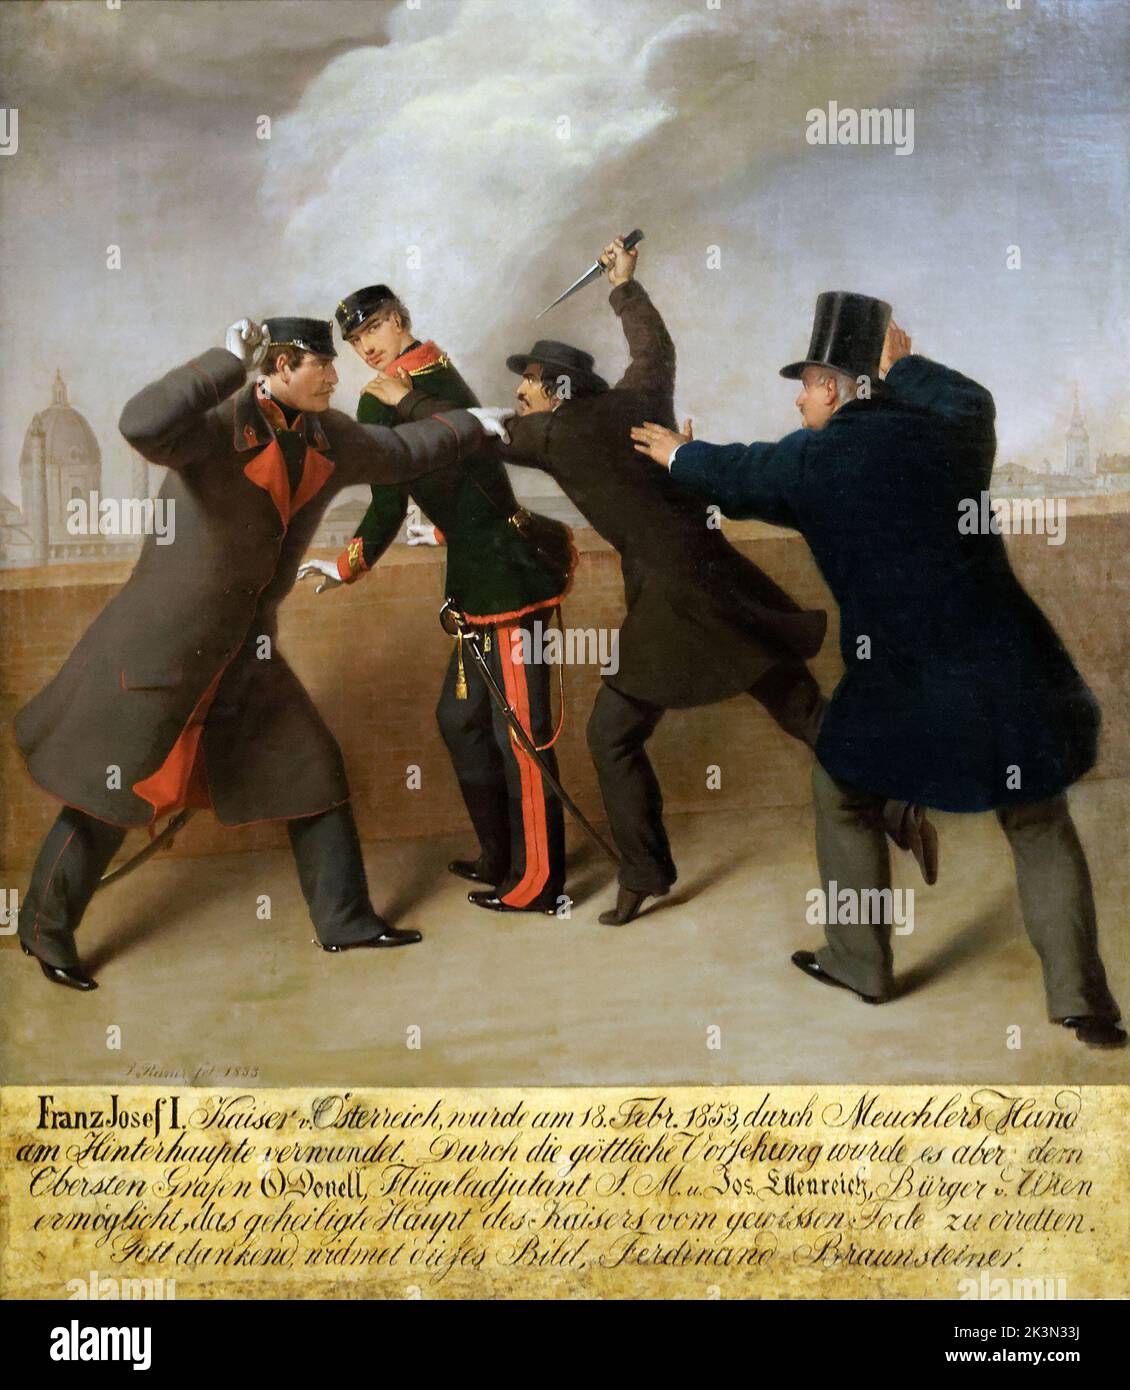 Assassination attempt on Franz Joseph the emperor in 1853. 18 February 1853, Franz Joseph survived an assassination attempt by Hungarian nationalist János Libényi. Stock Photo